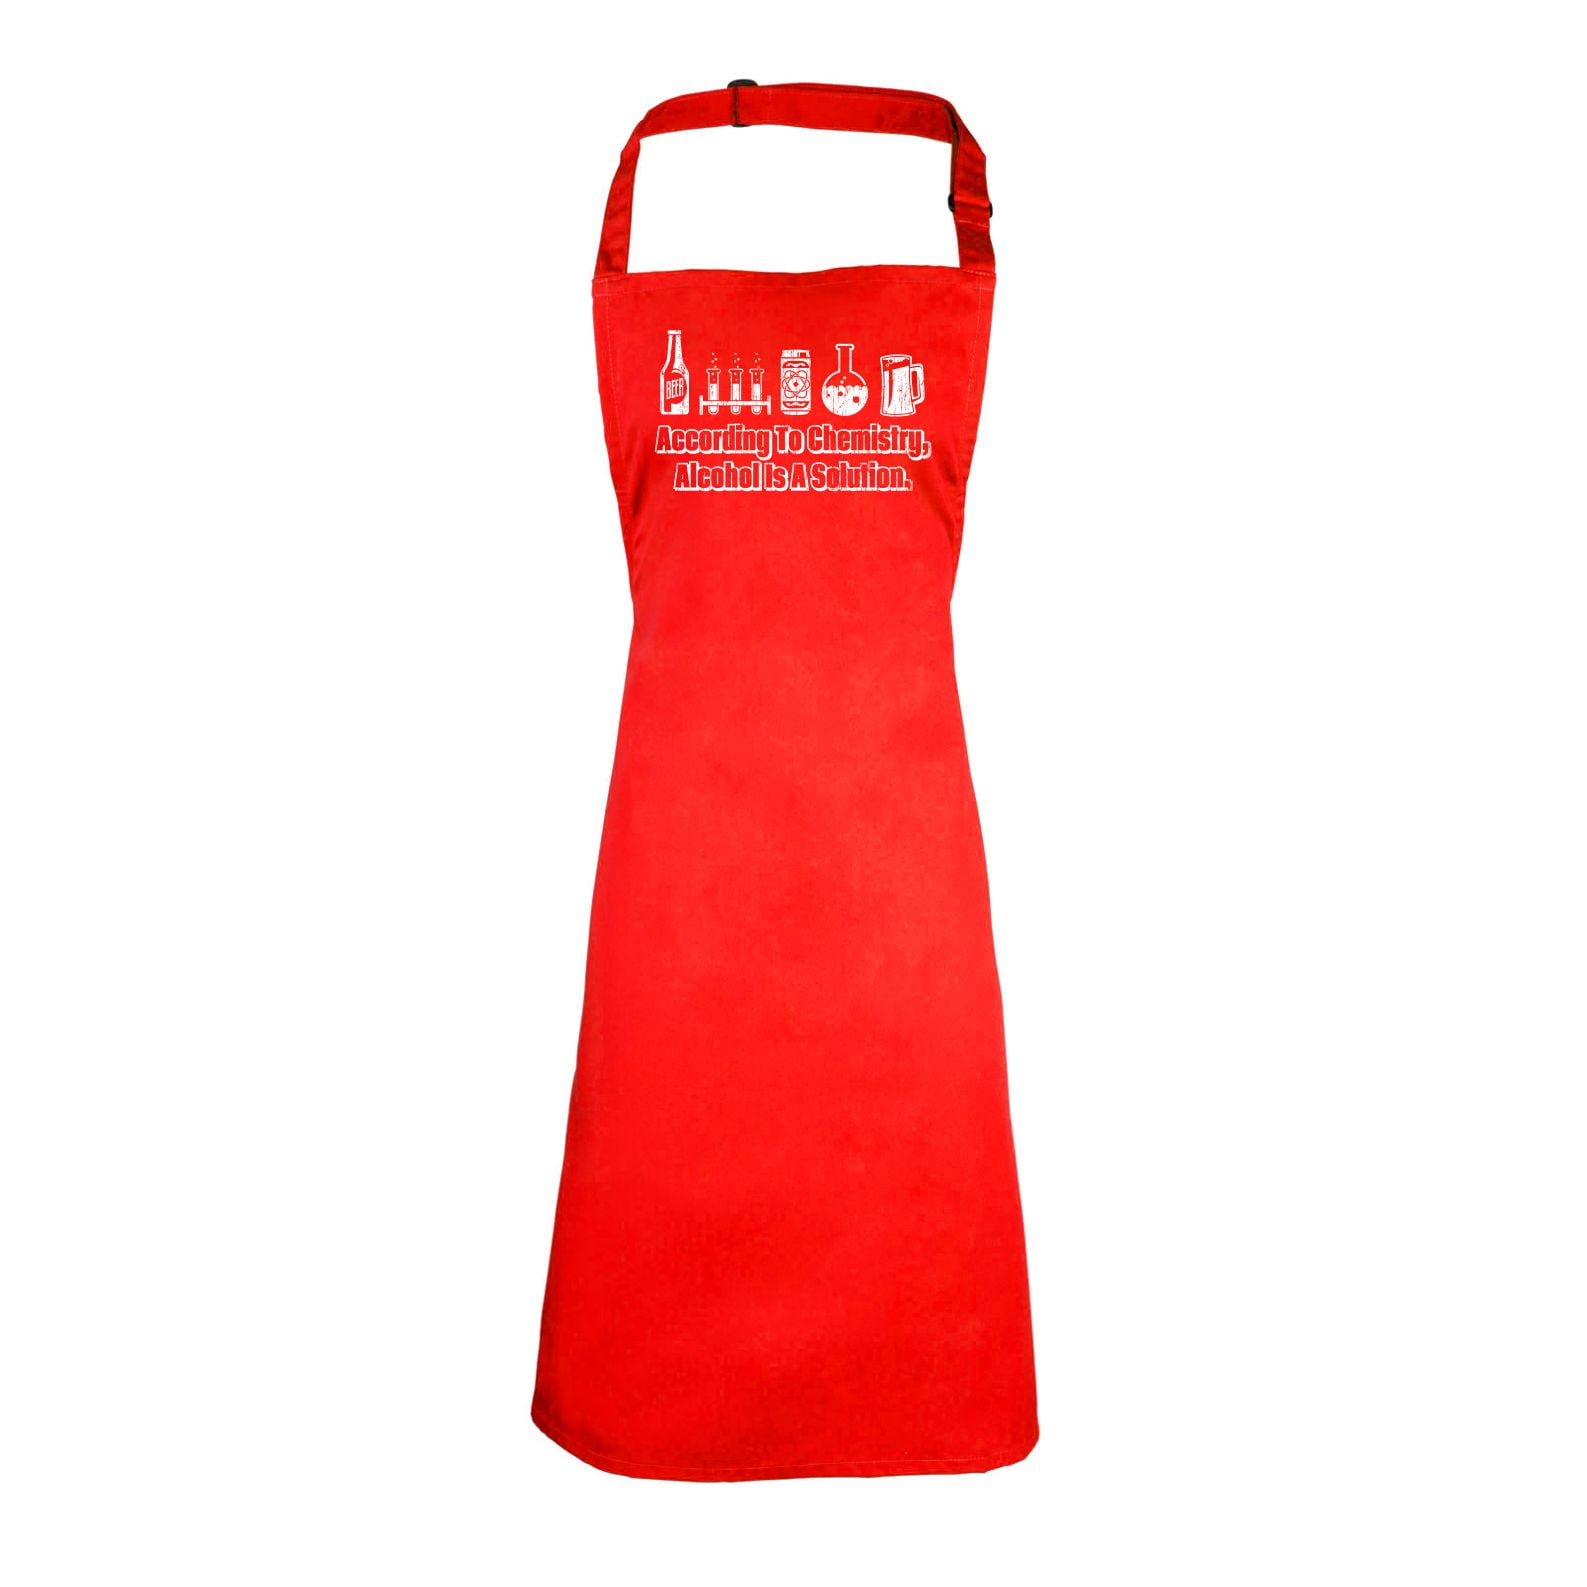 123t YOU CANT BUY HAPPINESS WINE Adult Kitchen Funny PREMIER APRON